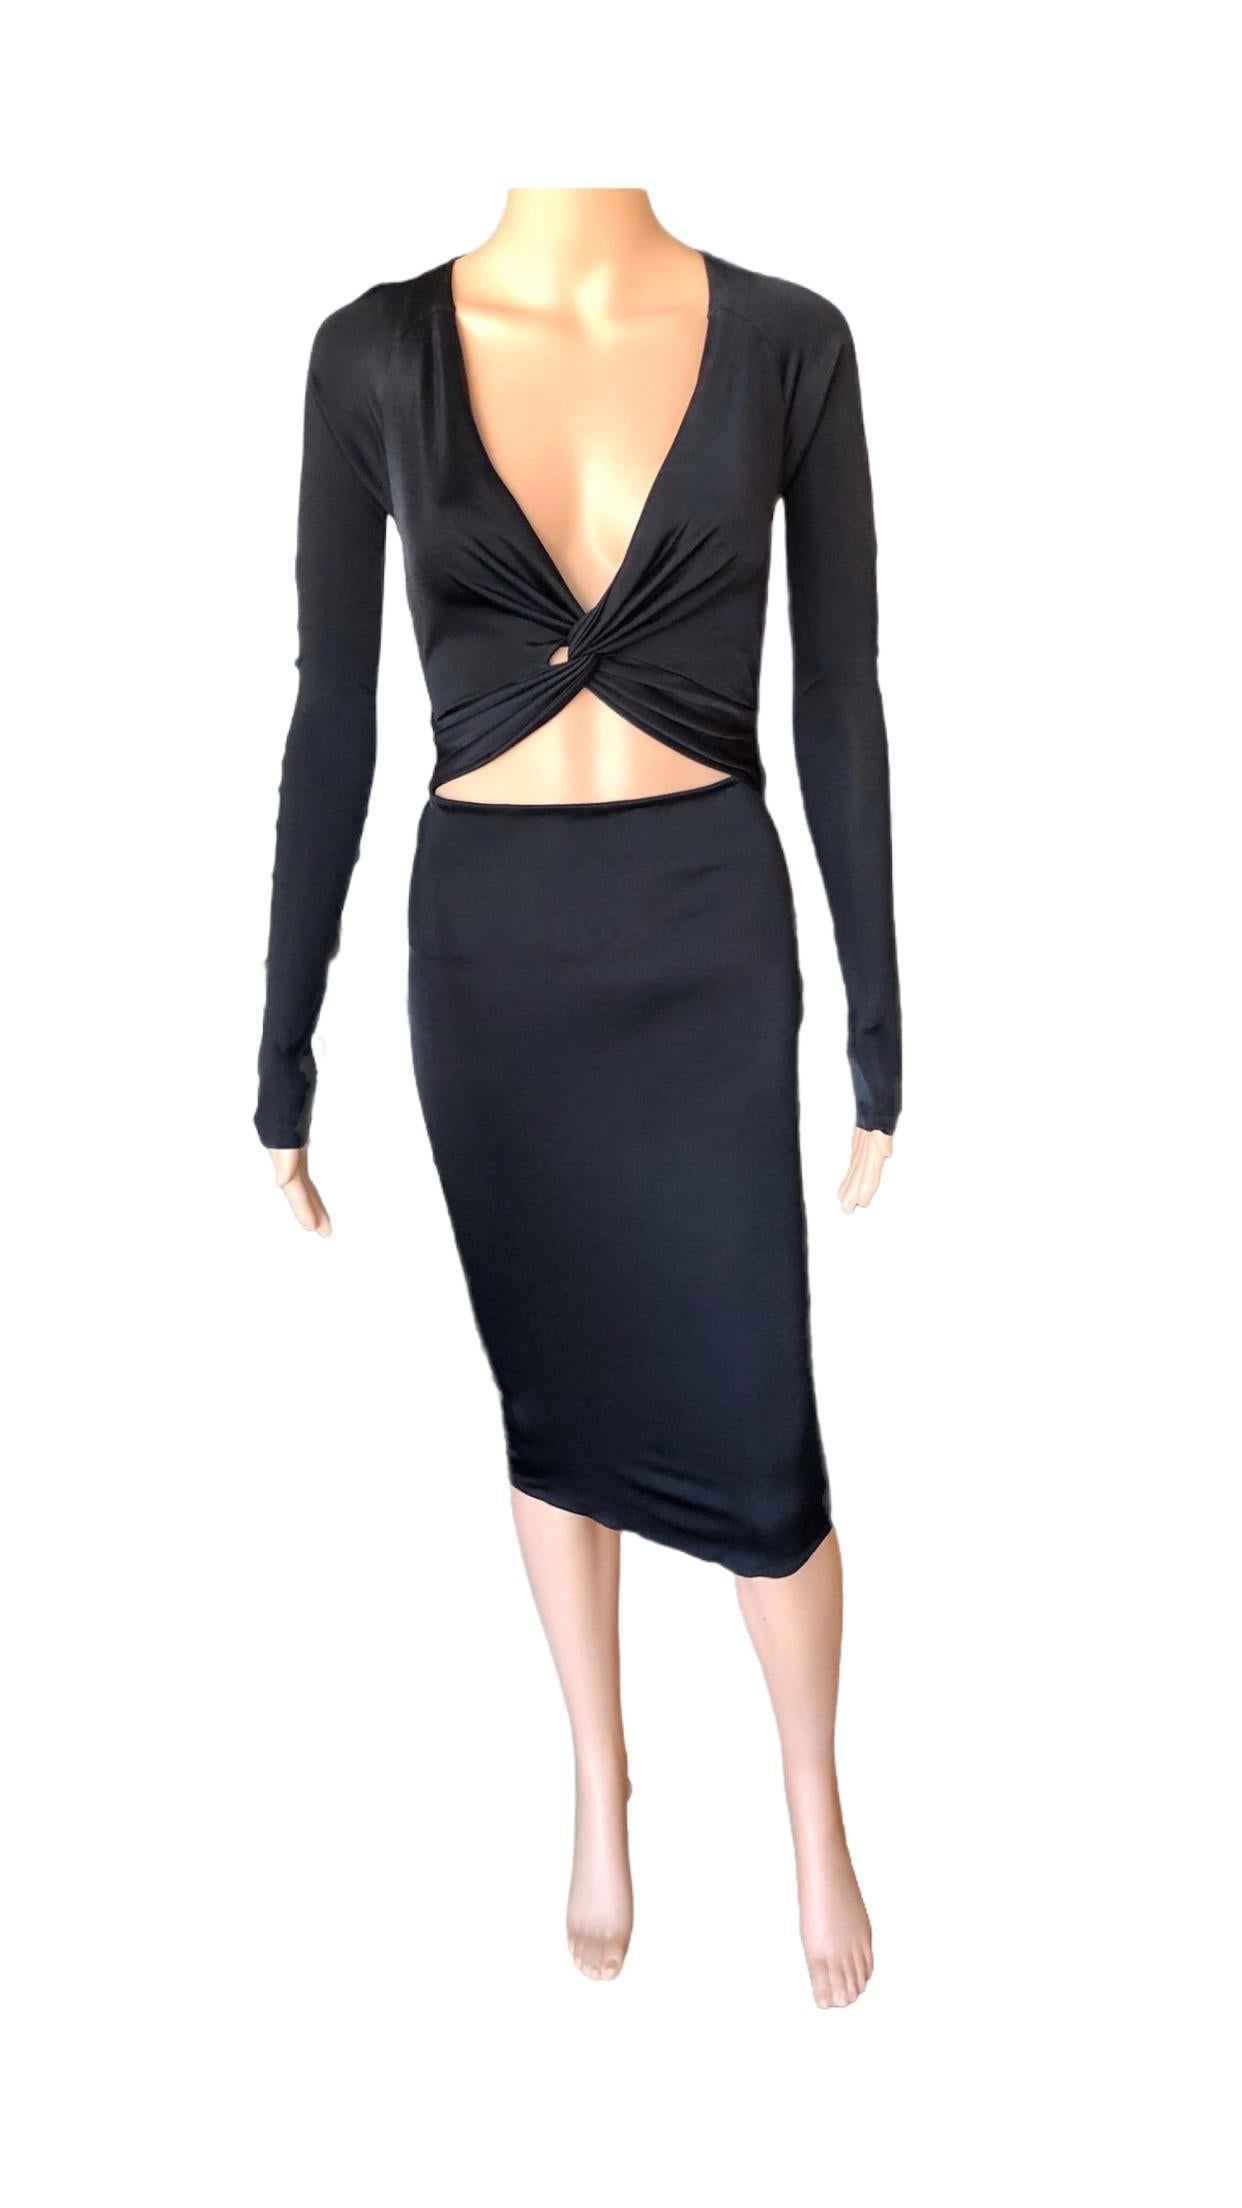 Gucci S/S 2005 Tom Ford Plunging Cutout Backless Bodycon Black Dress en vente 10